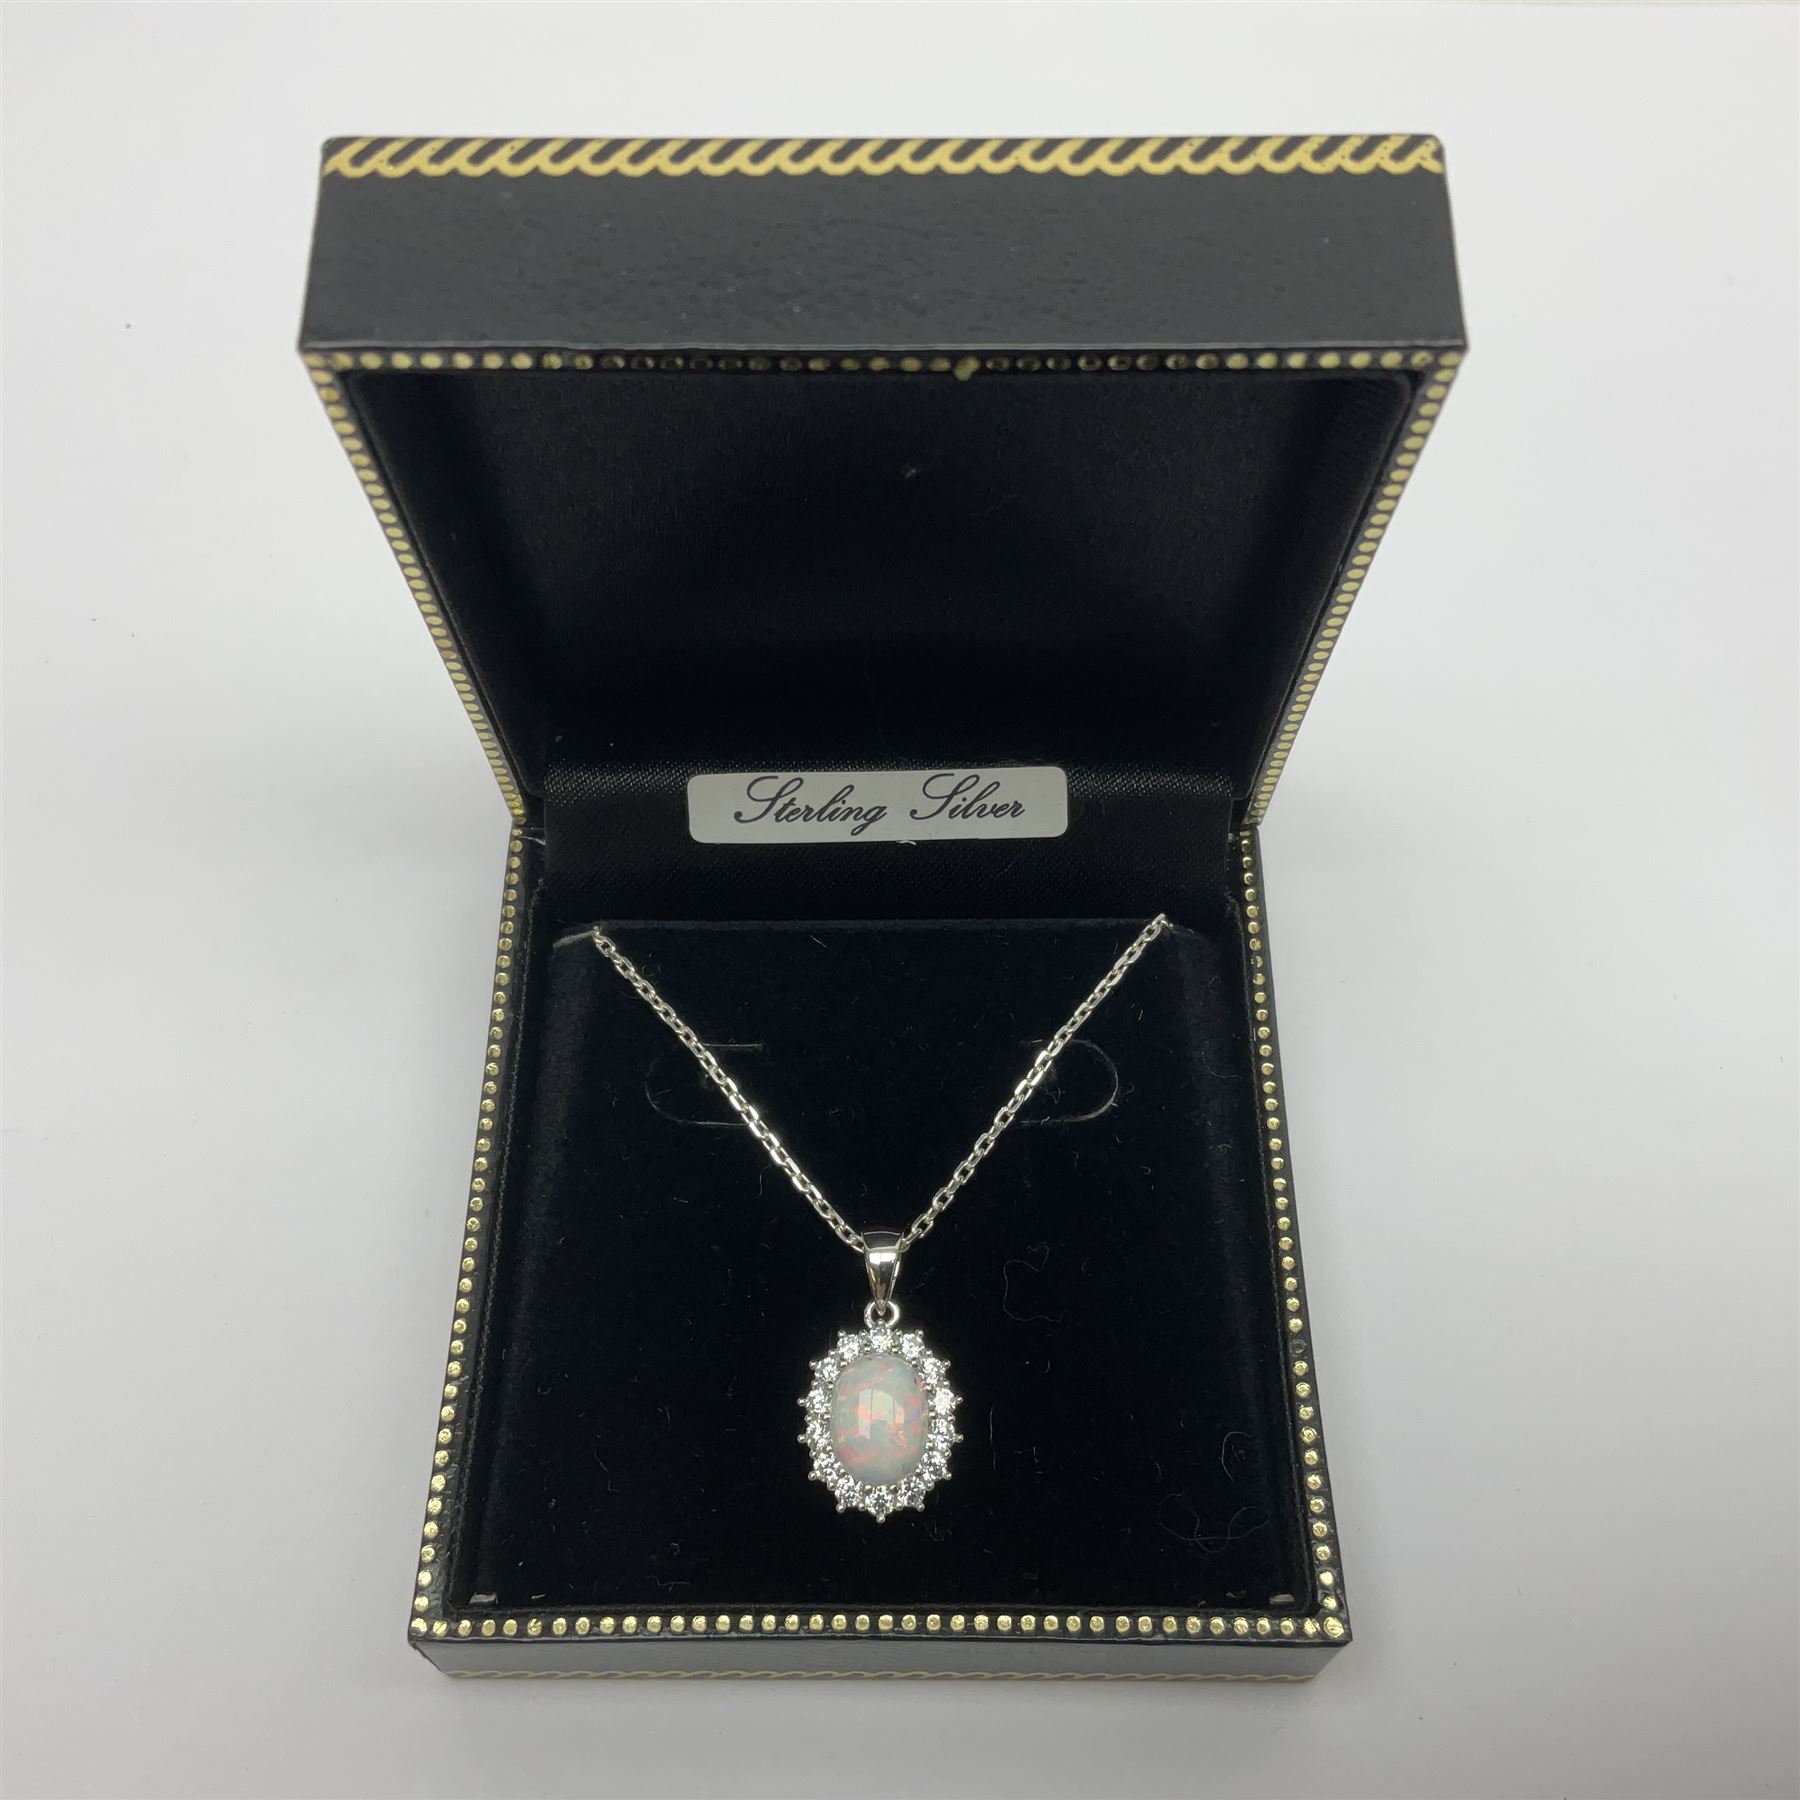 Silver opal and cubic zirconia cluster pendant necklace - Image 2 of 4